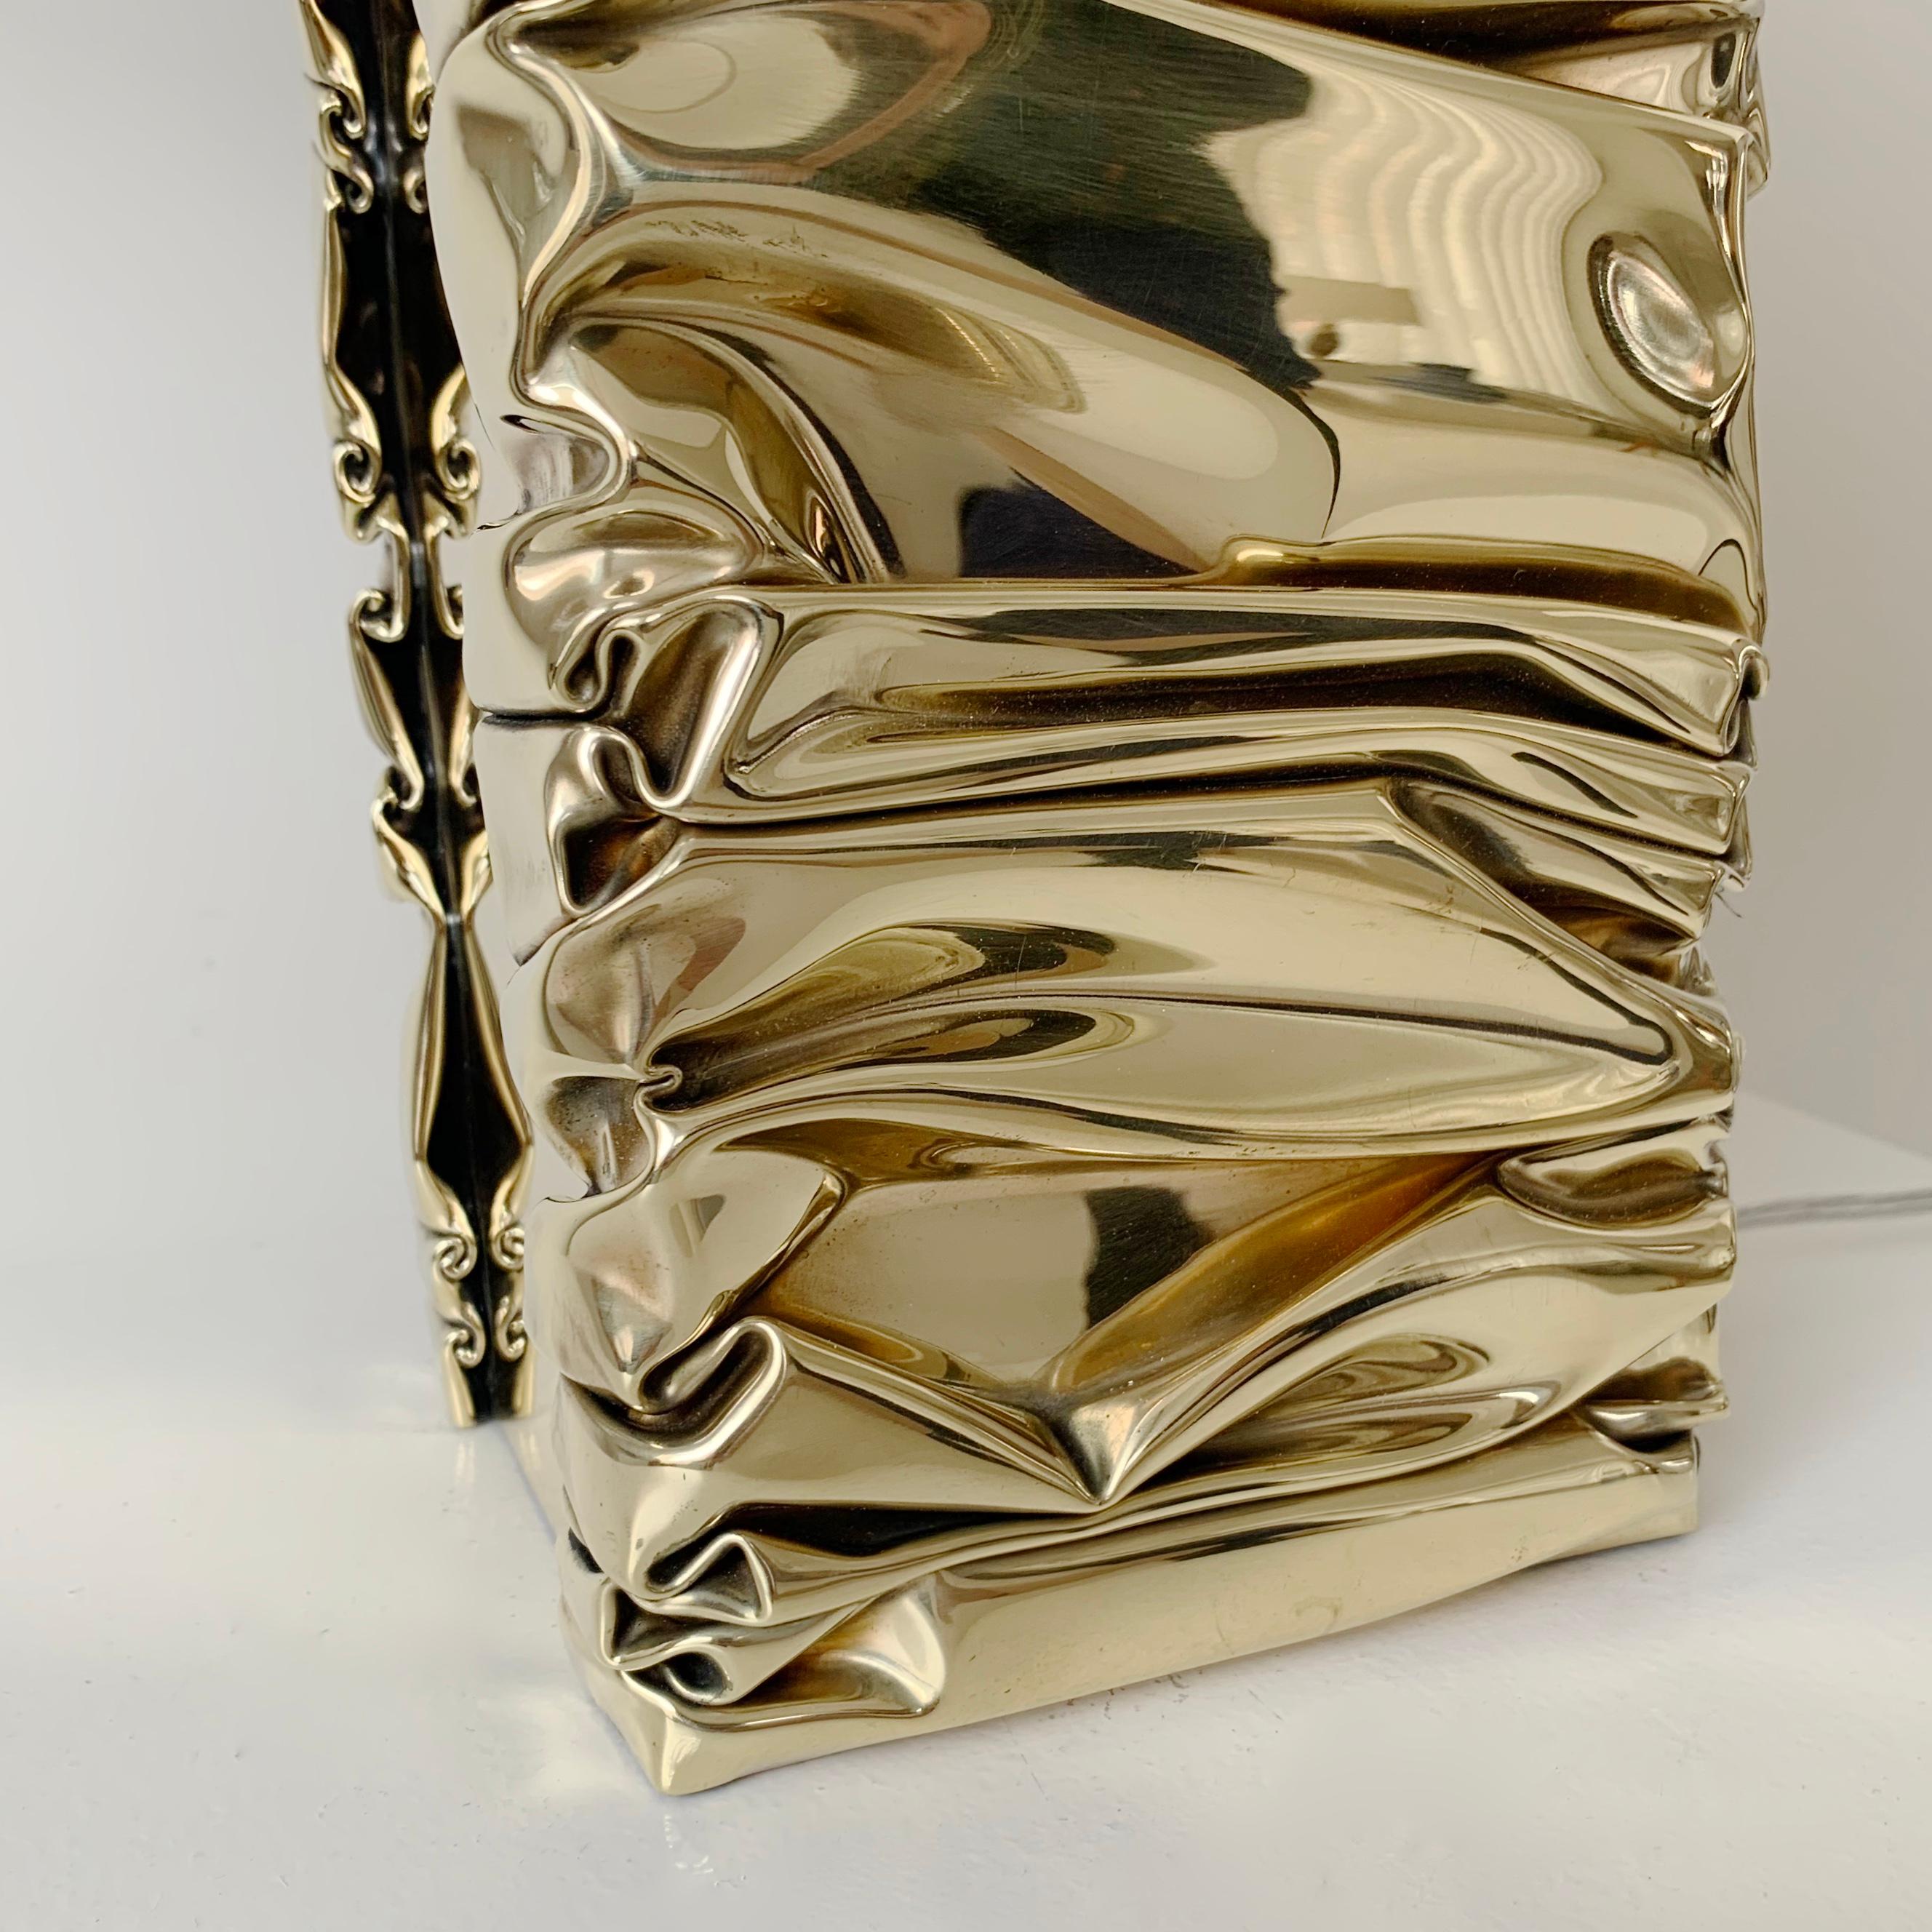 Jacques Moniquet Signed Brass Table Lamp, circa 1975, France. For Sale 5